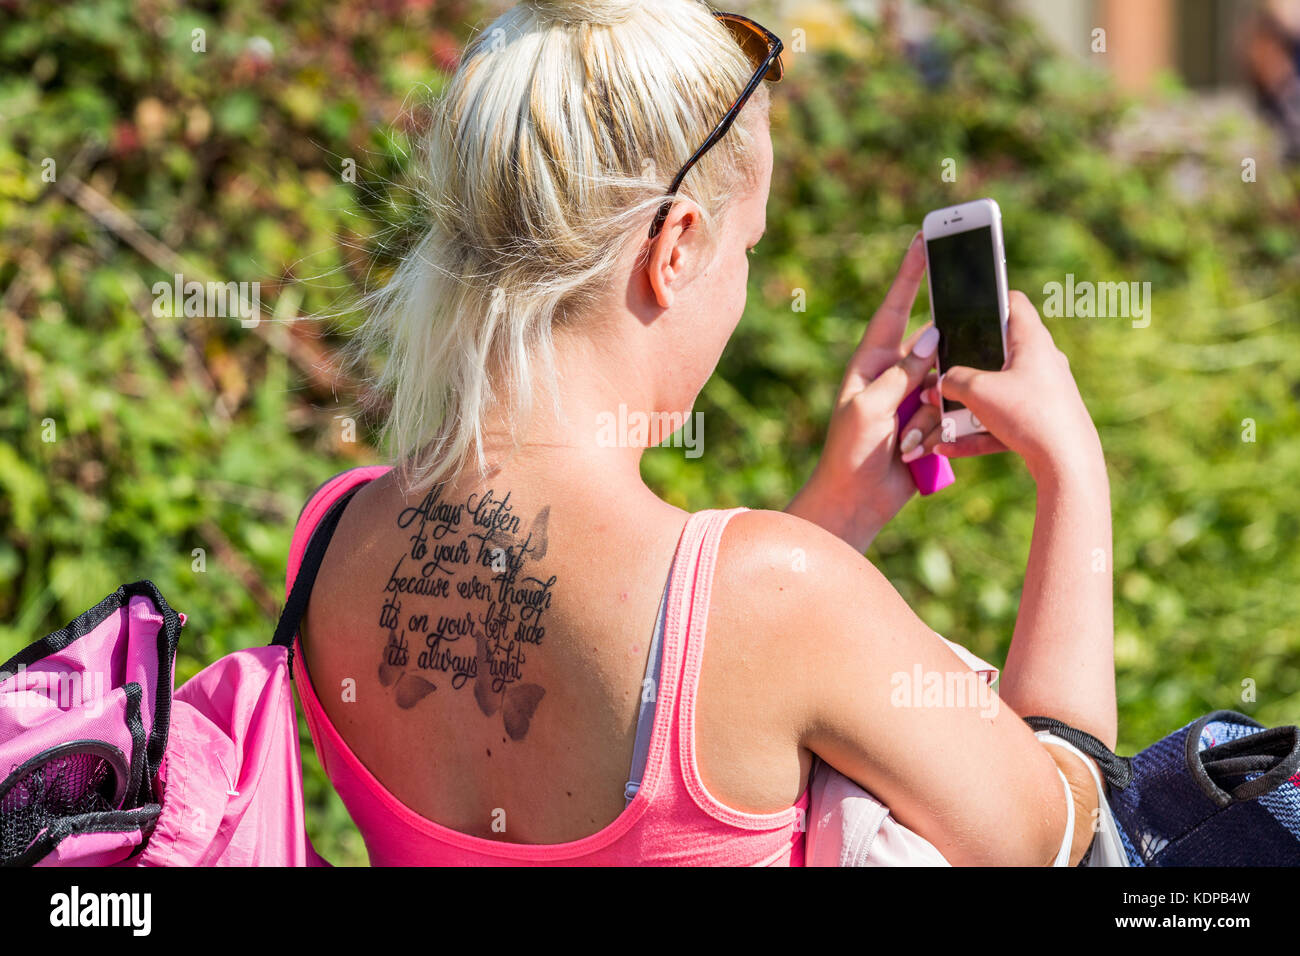 A young blonde hair woman wearing a low cut top and sunglasses with a tattoo on her back taking a selfie photo, Bournemouth, England UK Stock Photo